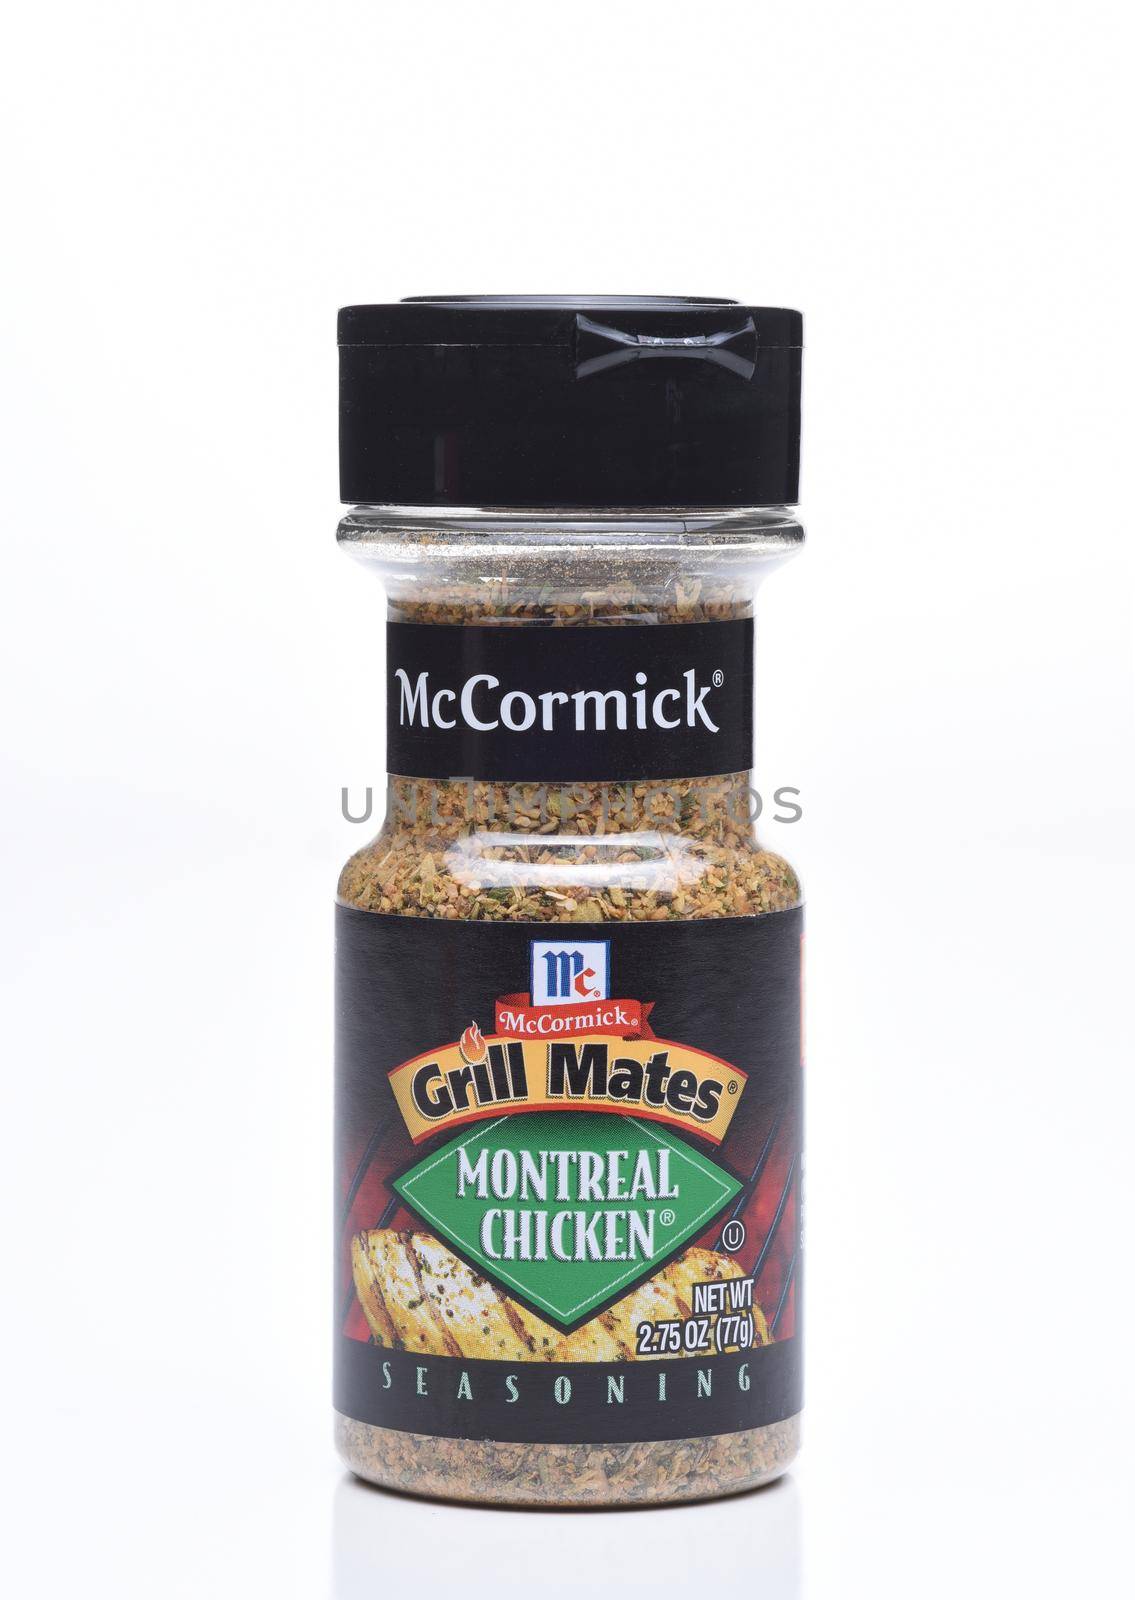 IRVINE, CALIFORNIA - DEC 4, 2018: A jar of  McCormick Grill Mates Montreal Chicken seasoning, a blend of garlic and herbs to liven up the flavor of grilled chicken, pork or seafood.